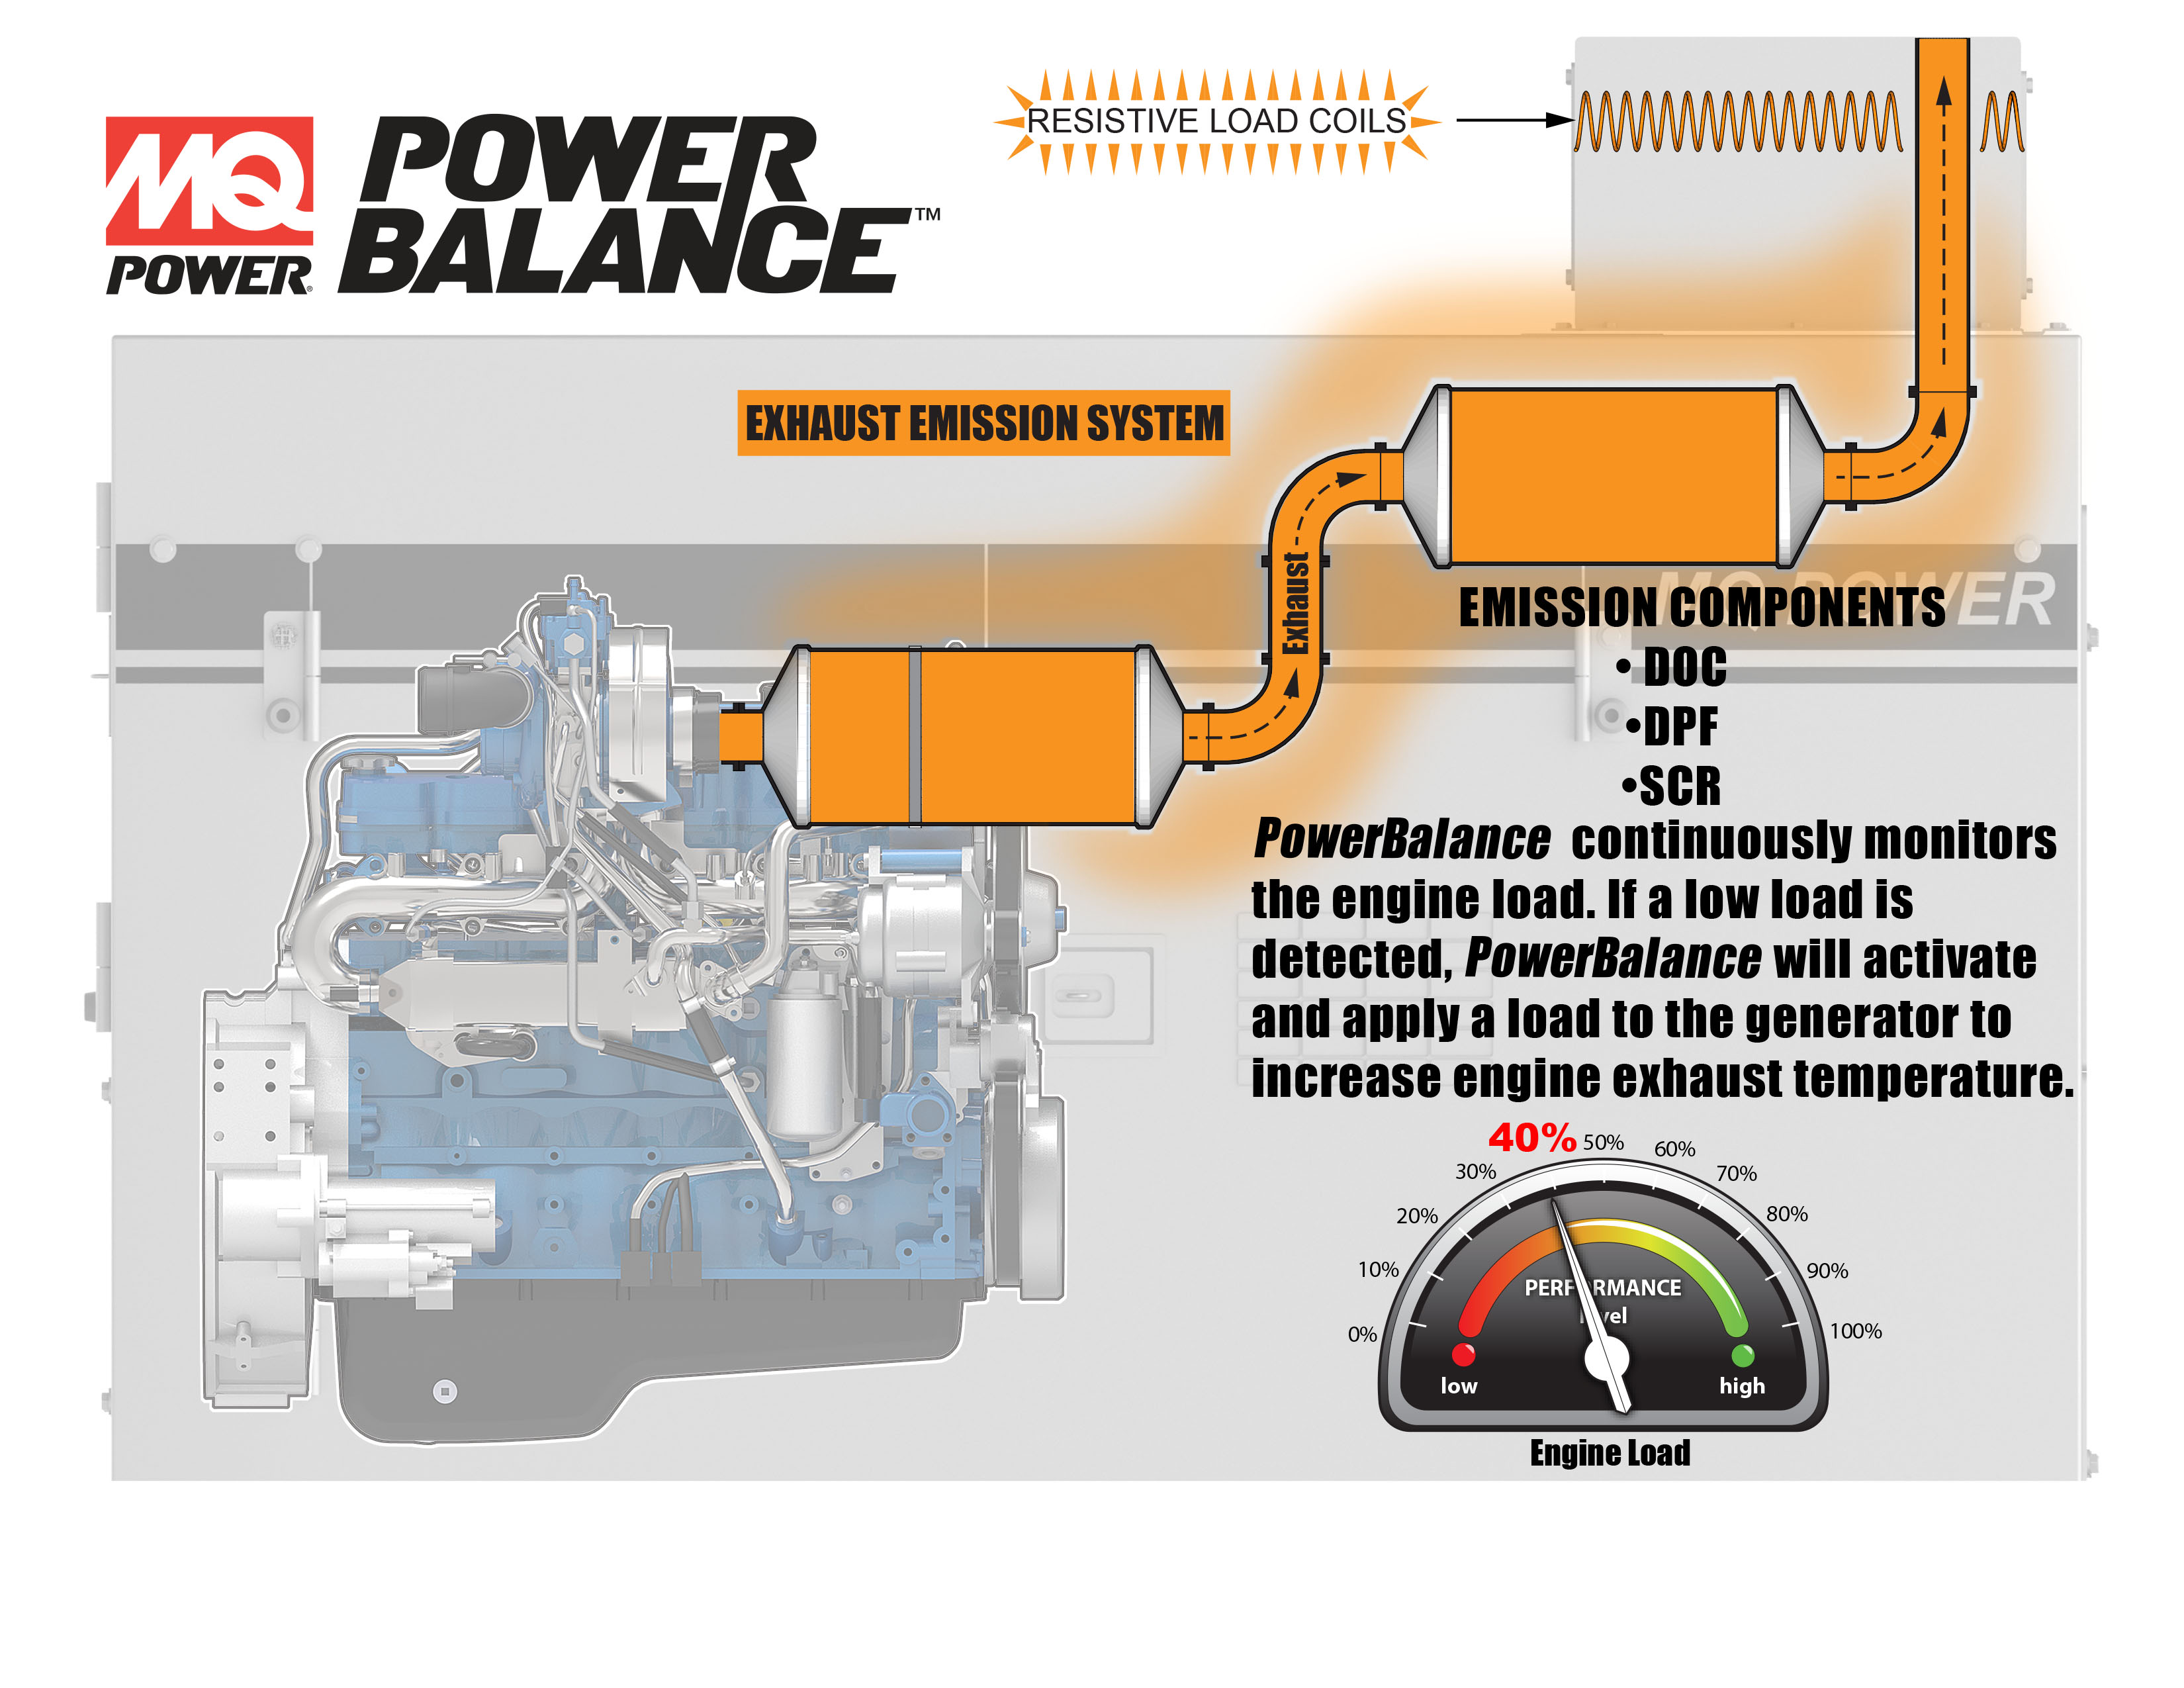 PowerBalance™ continuously and automatically monitors engine load.